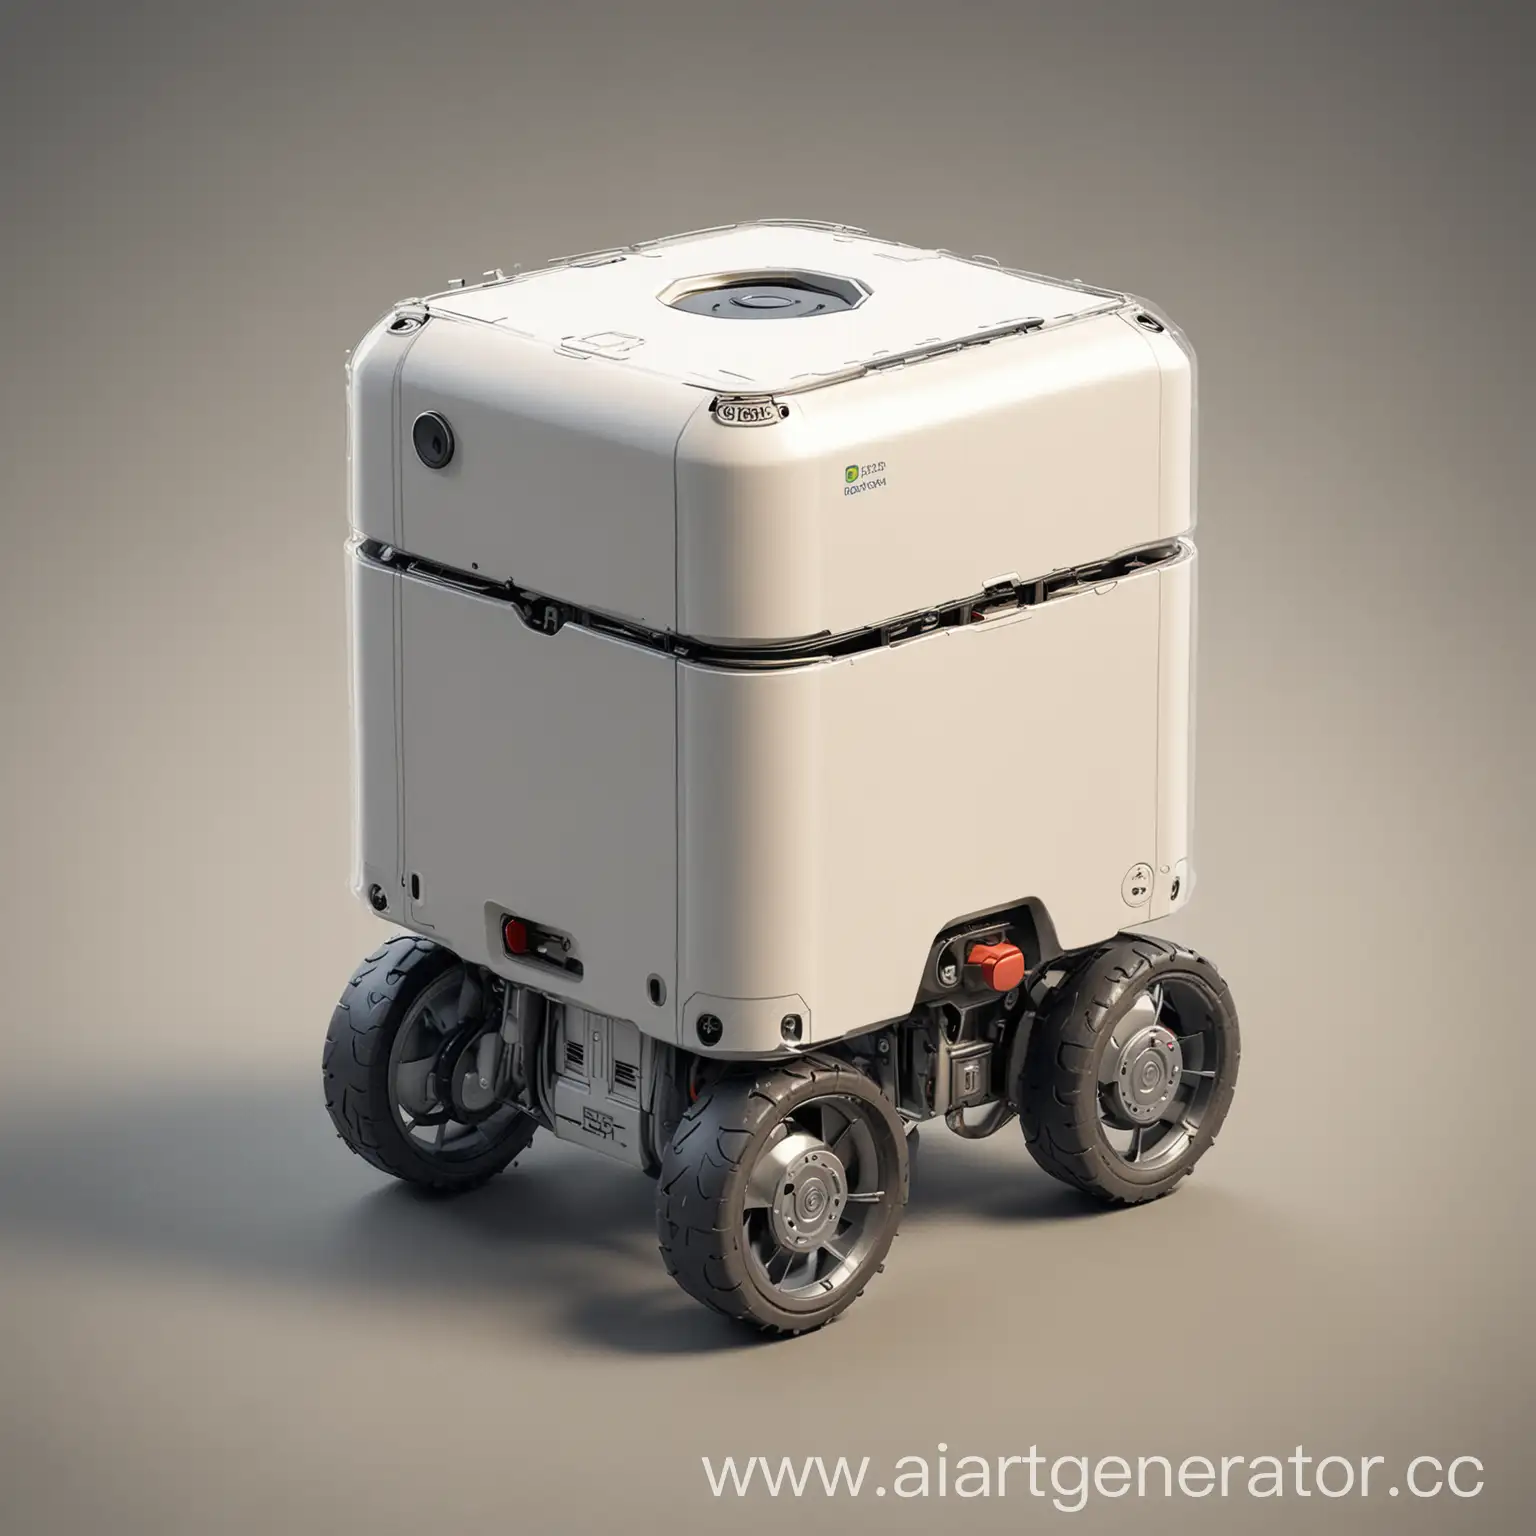 Urban-Food-Delivery-Small-Square-Robot